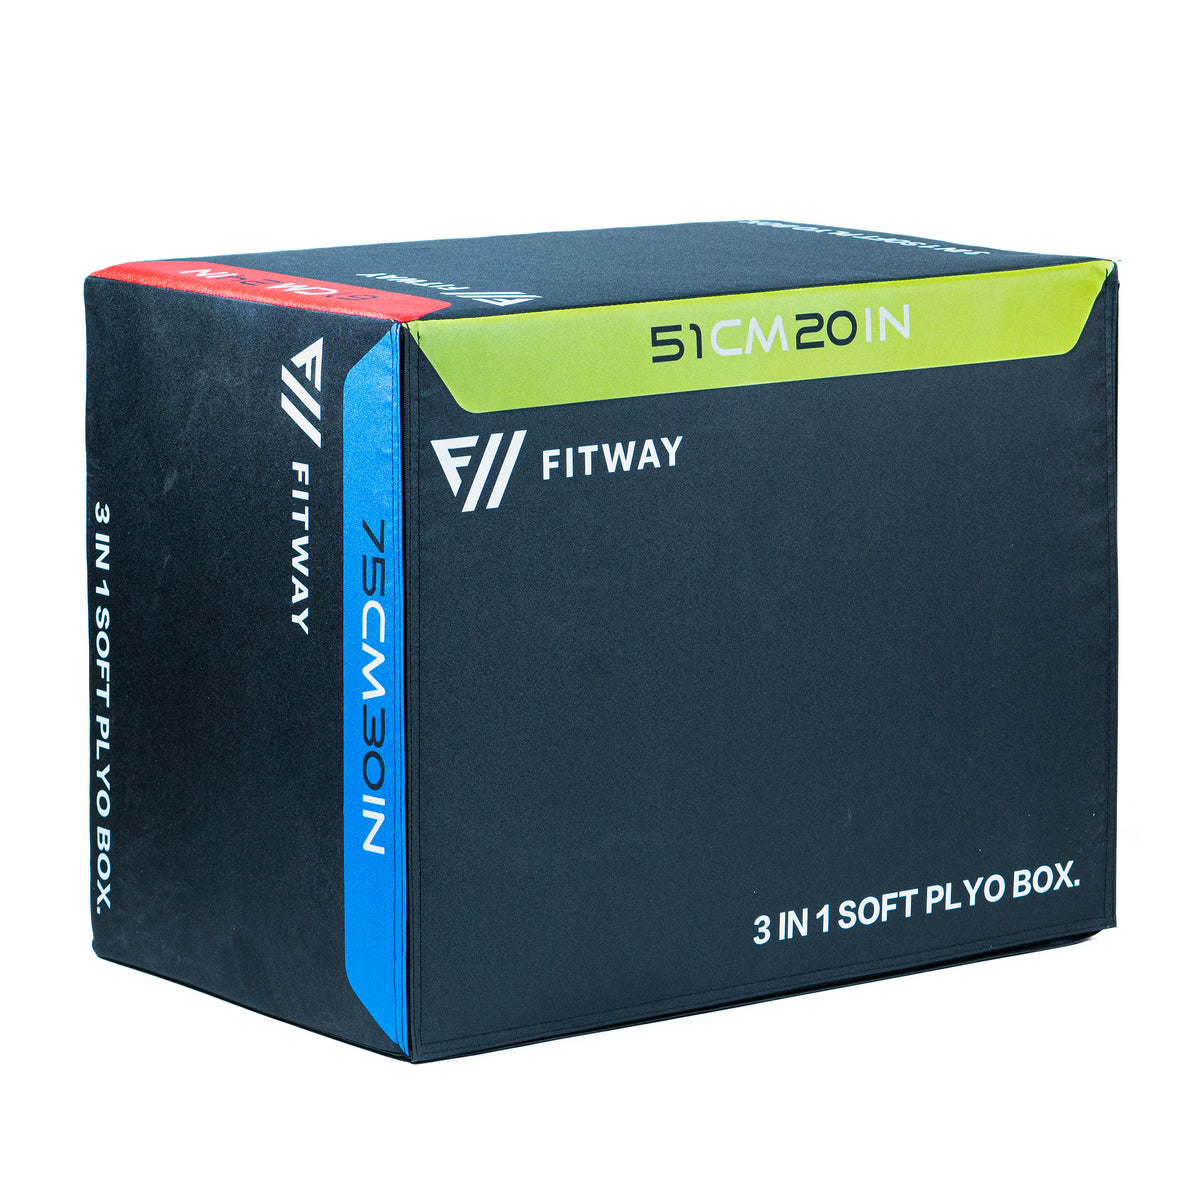 FitWay Equip. 3-in-1 Soft Plyo Box